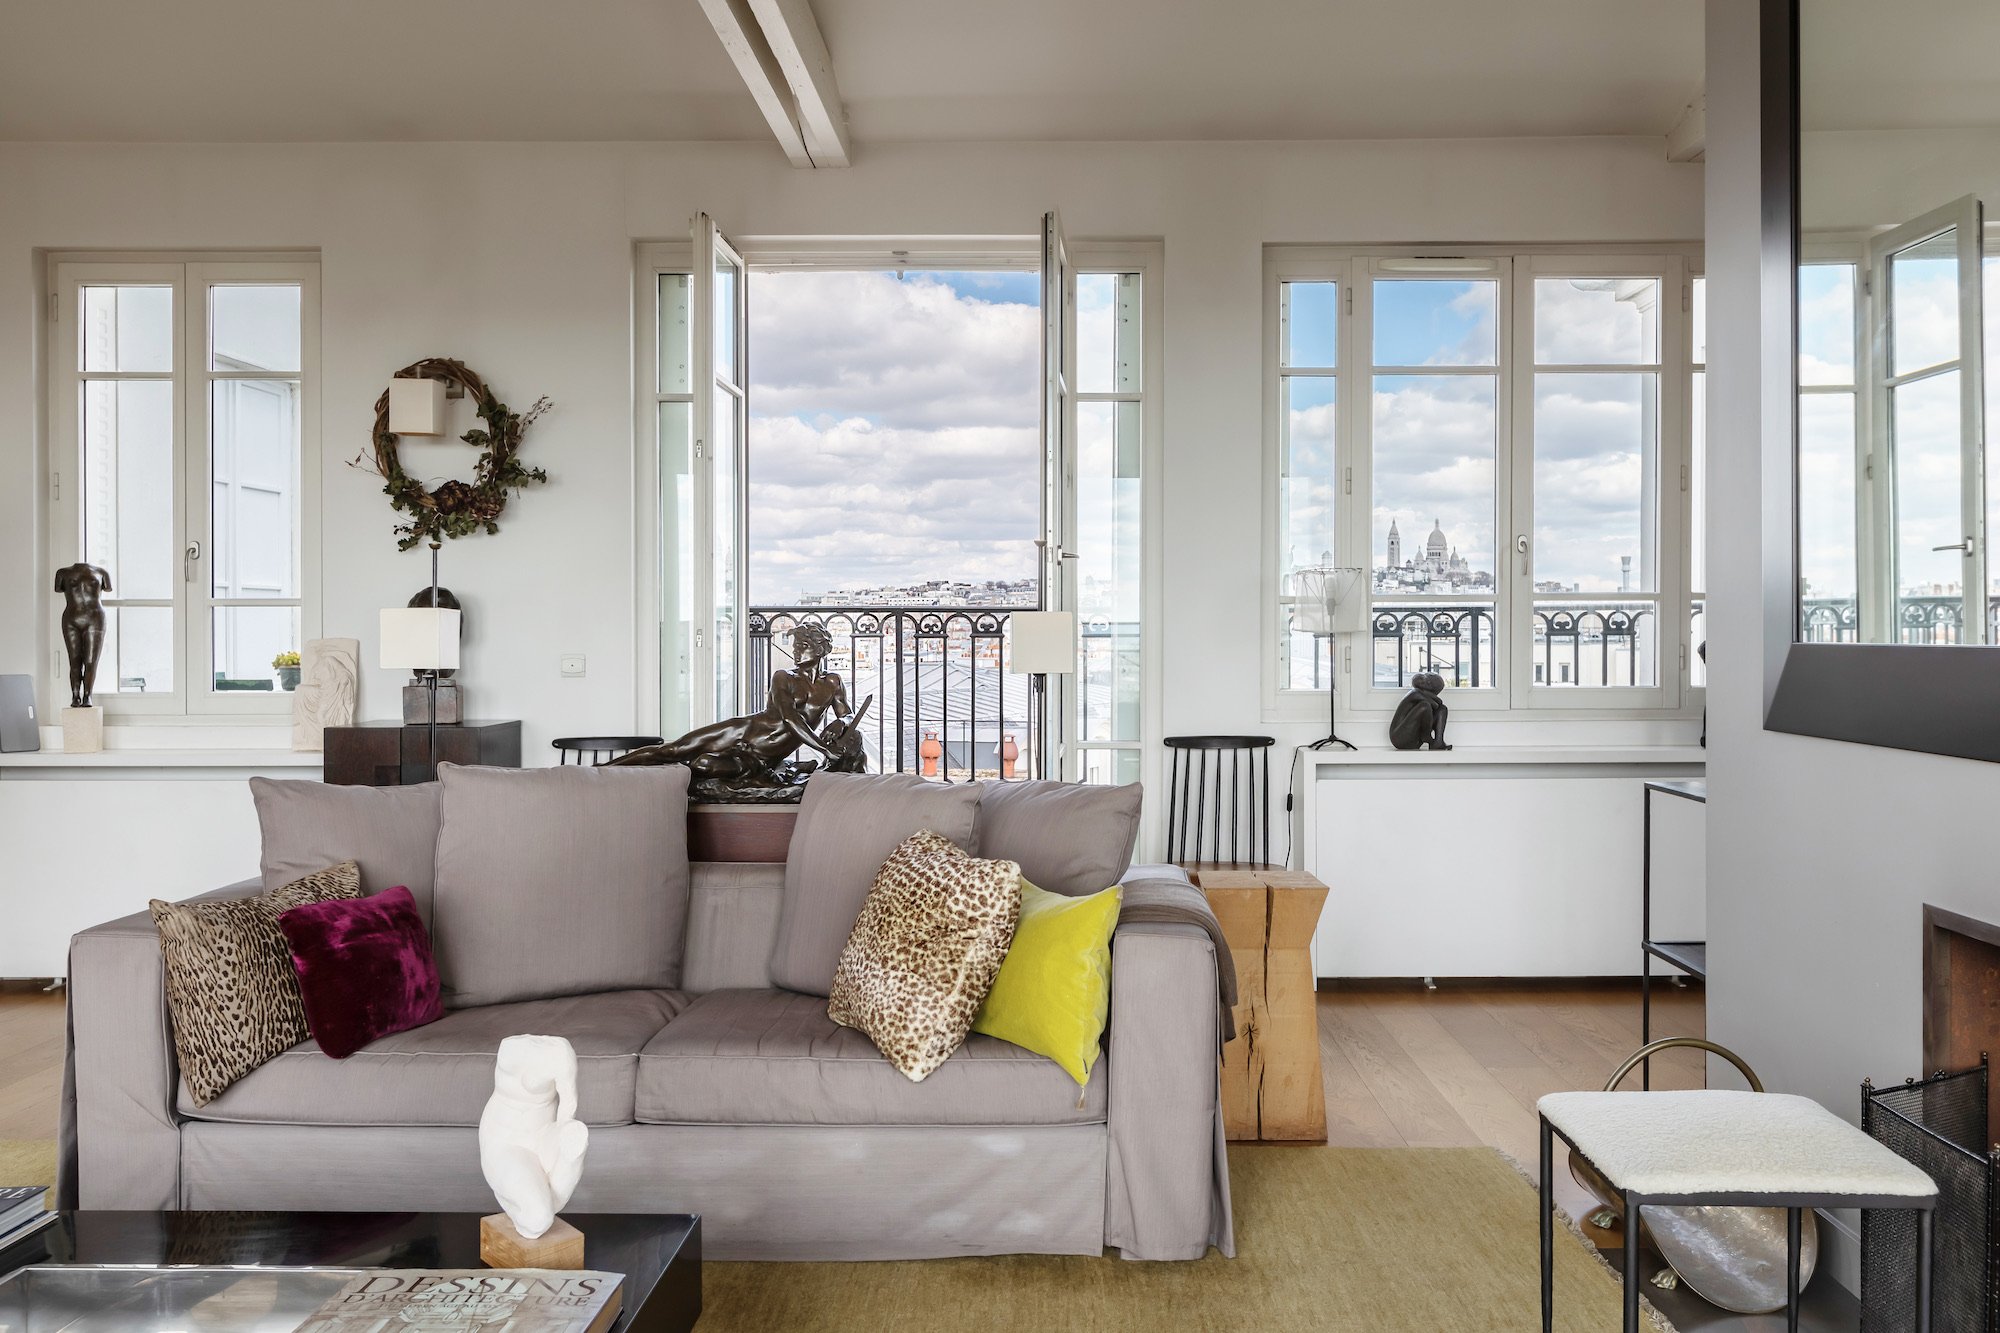 Exceptional apartment in Paris with rooftop view of the Eiffel Tower and central Paris